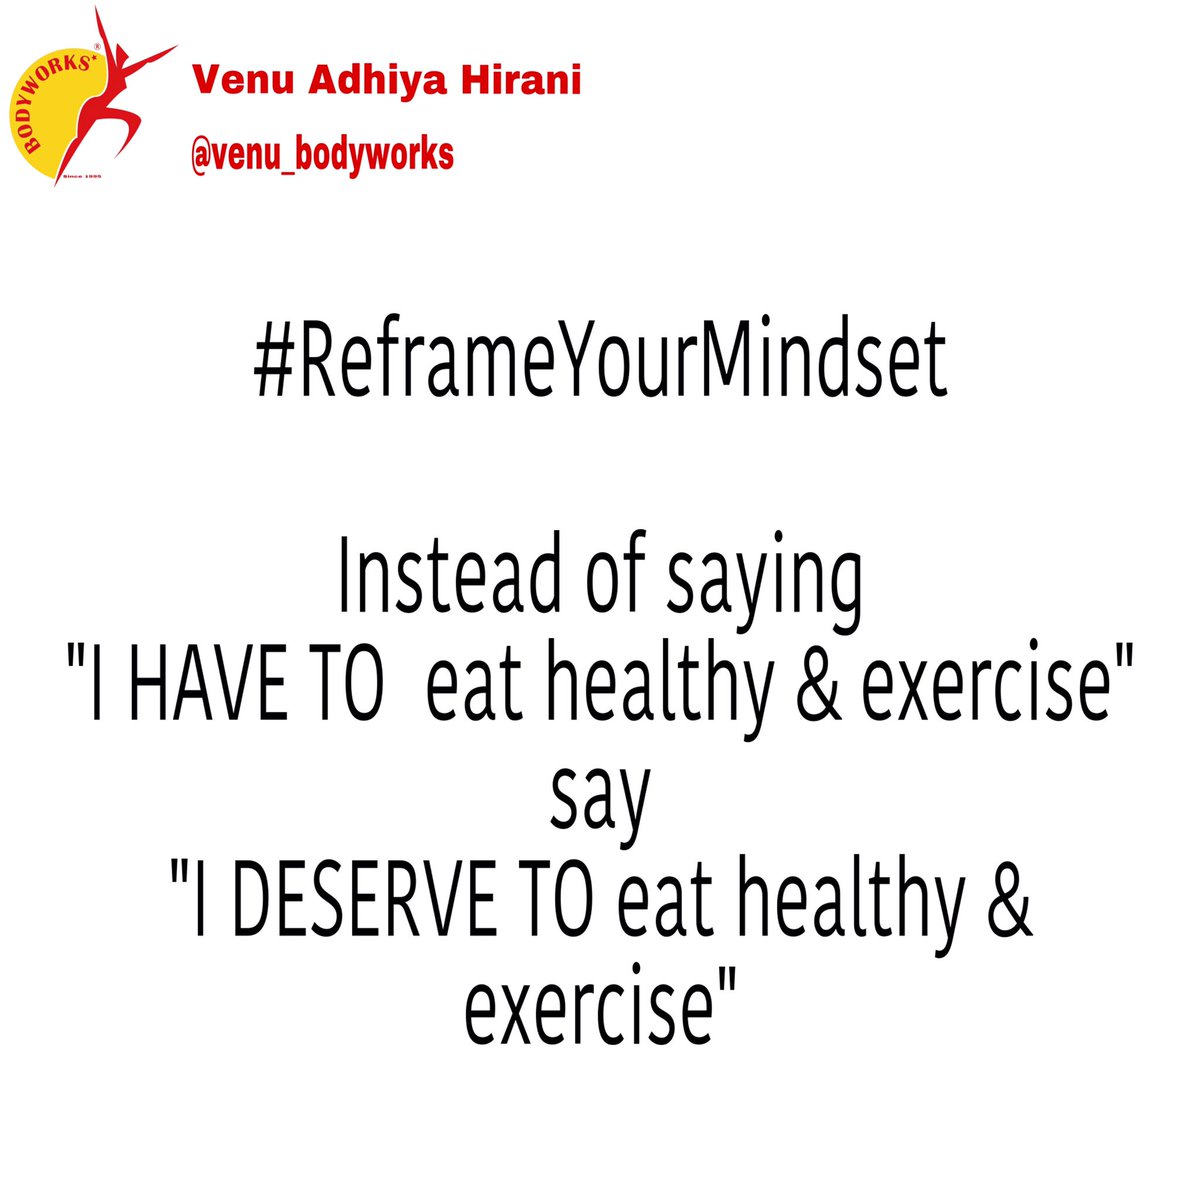 #healthaffirmations #fitnessgoals #diet #Yoga #health #exercise #thoughtsbecomethings #positiveaffirmations #affirmations  #lawofattraction #affirmationsforwomen #positivethinking #affirmationsforlife #successaffirmations #higherconsciousness #dailyaffirmation